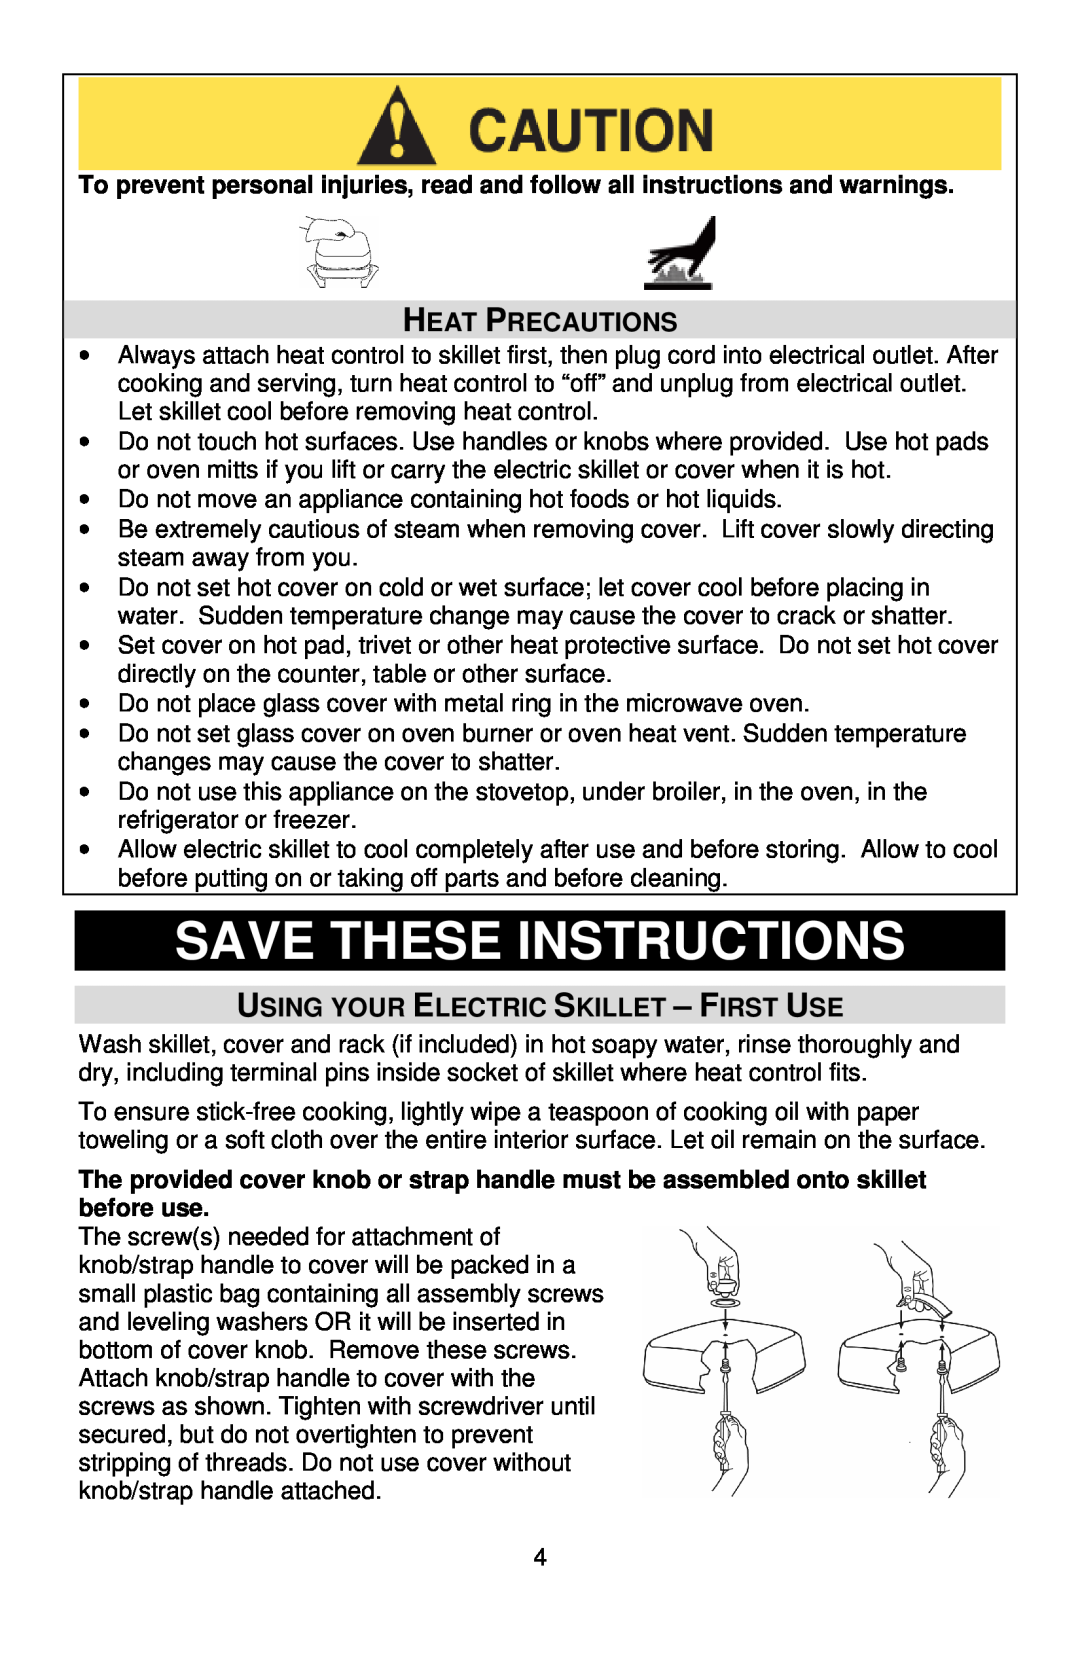 West Bend L5571D instruction manual Save These Instructions, Heat Precautions, Using Your Electric Skillet - First Use 